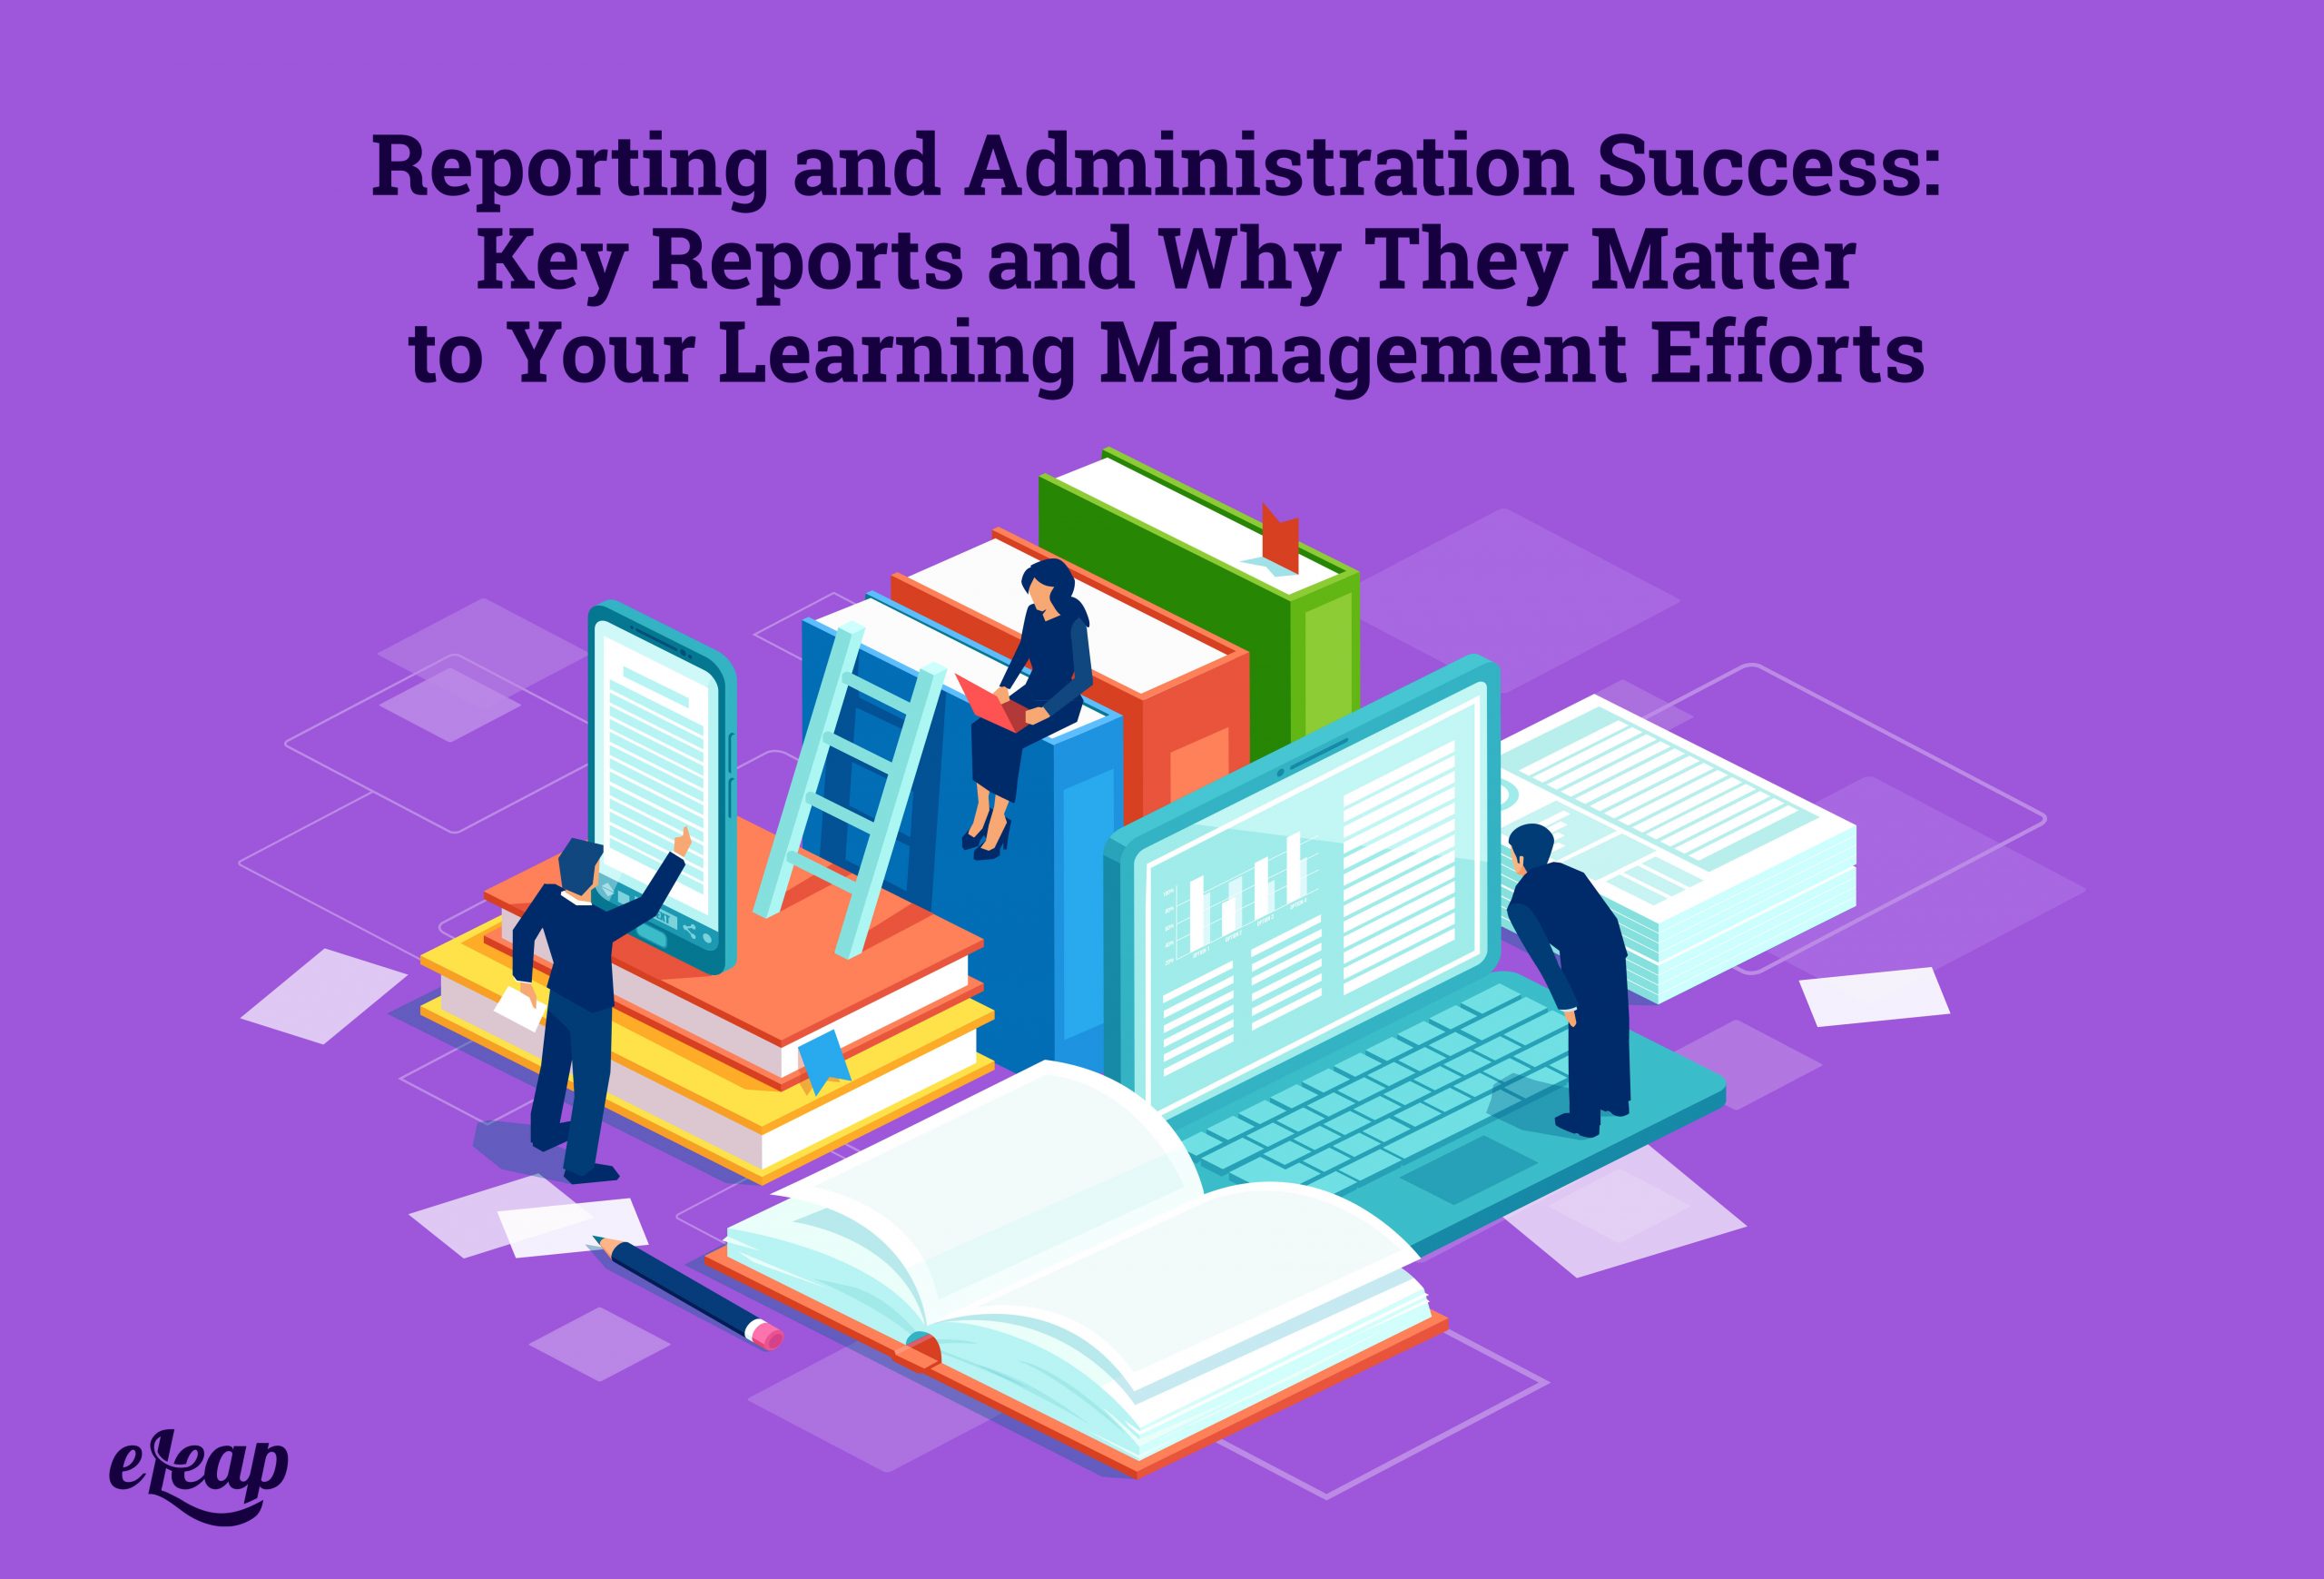 Reporting and Administration Success: Key Reports and Why They Matter to Your Learning Management Efforts